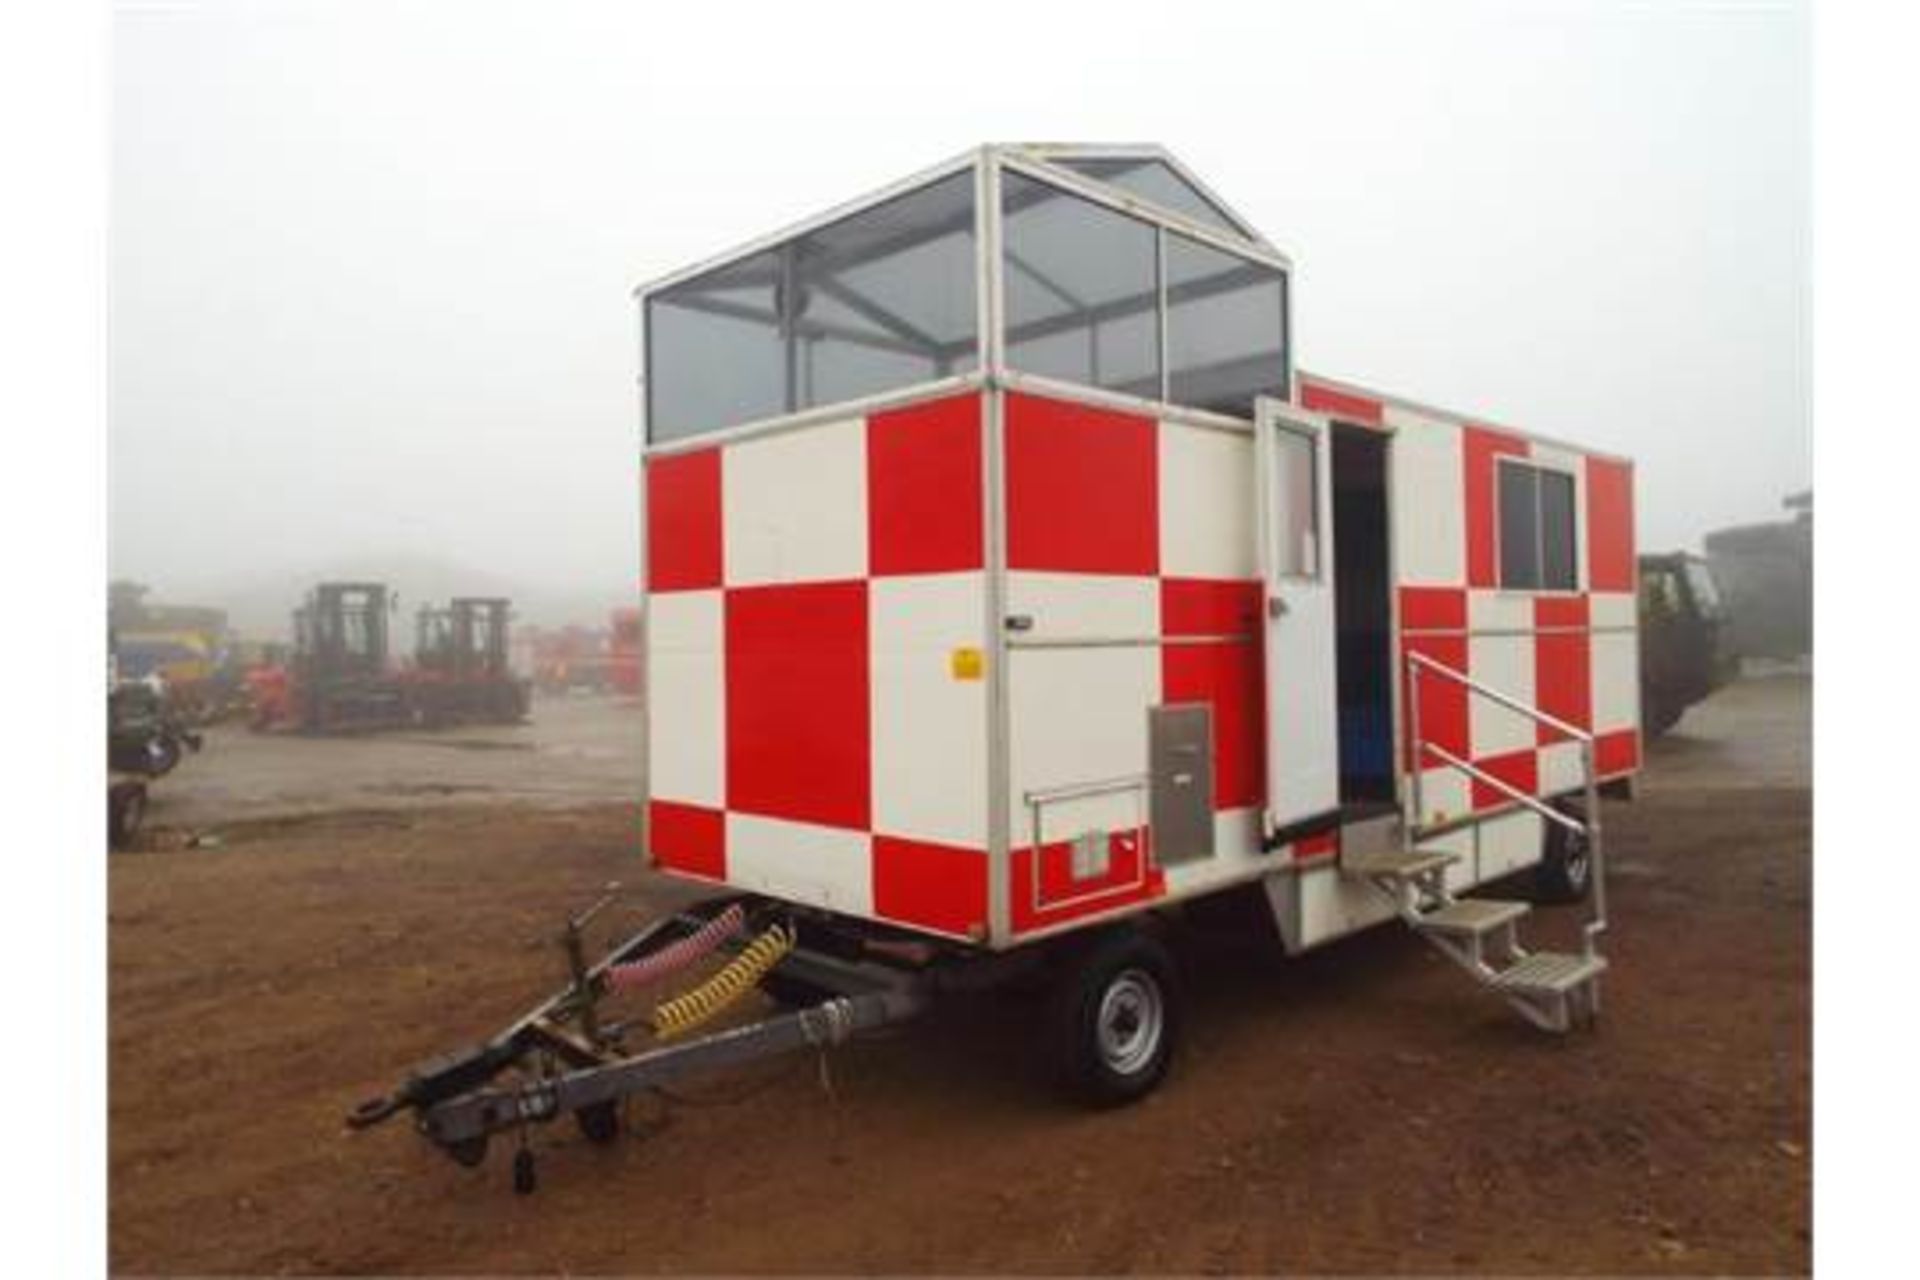 Royal Air Force Mobile Observation and Command Centre